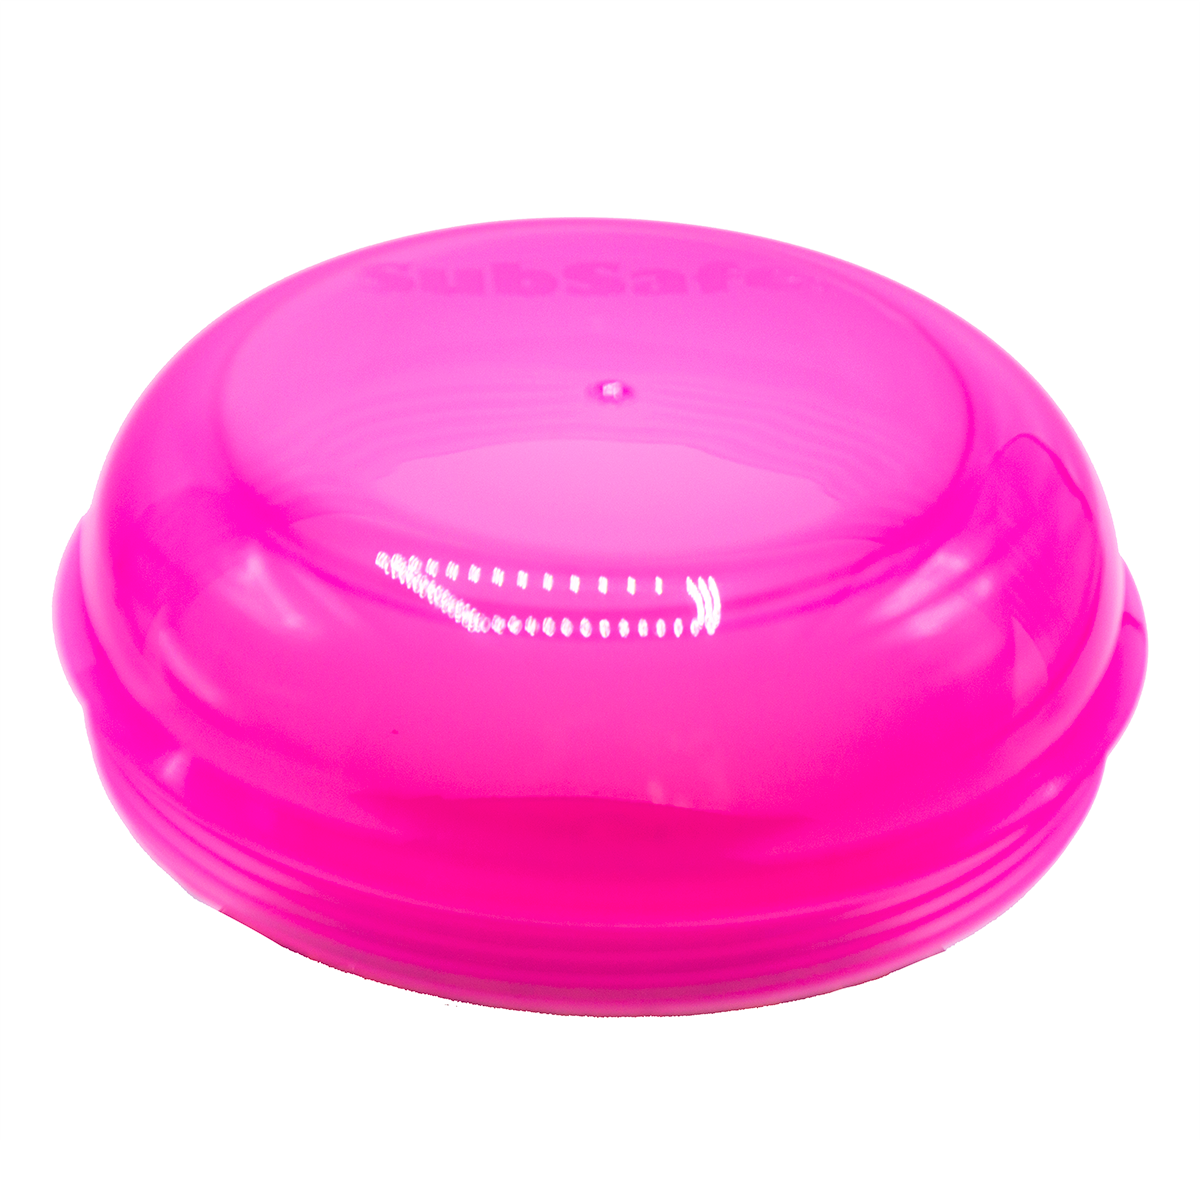 SubSafe Cap Accessory - Use with large SubSafe piece